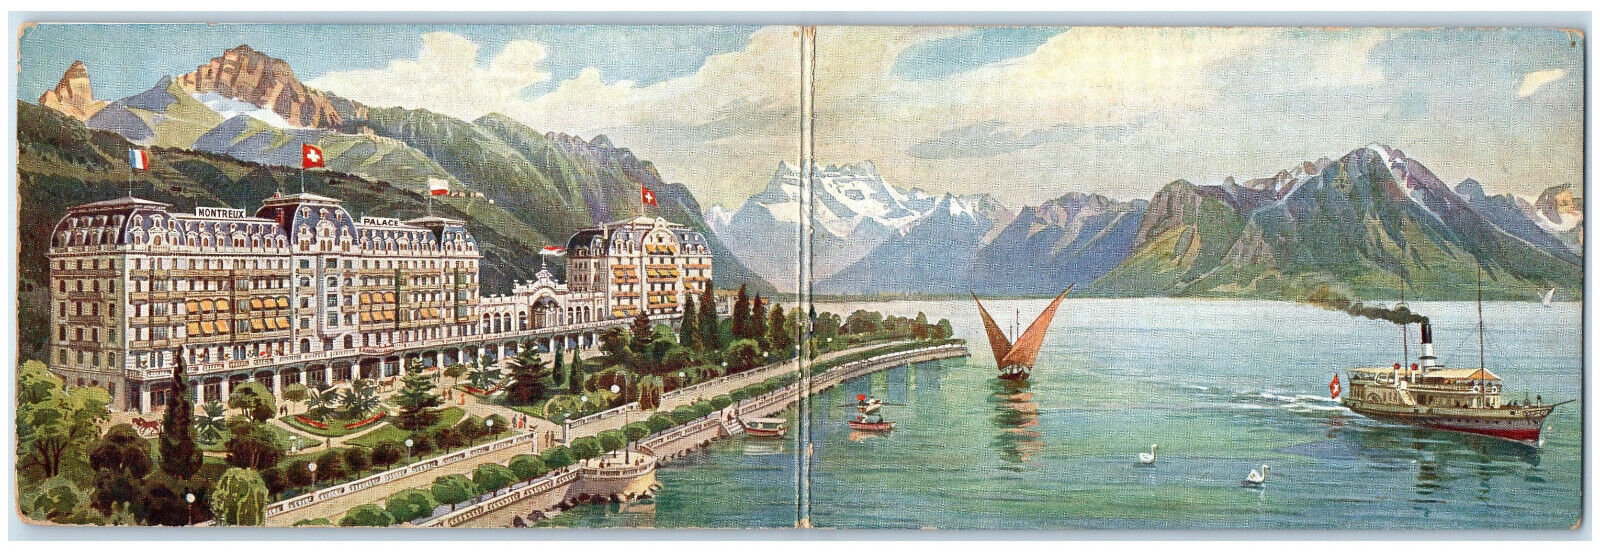 c1910 Montreux Palace Steamboat Montreux Switzerland Fold-Out Postcard